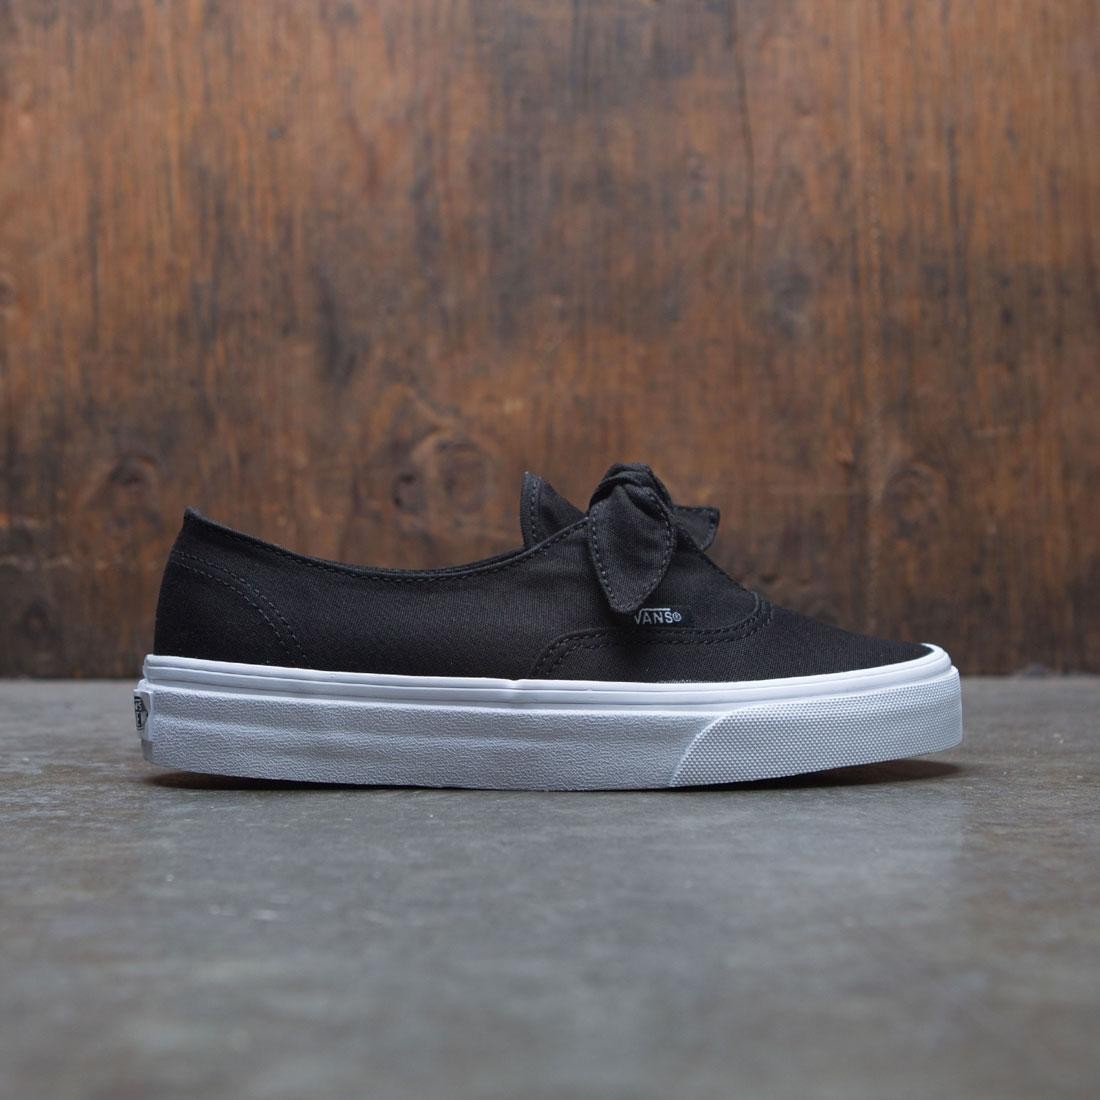 black and white authentic vans womens